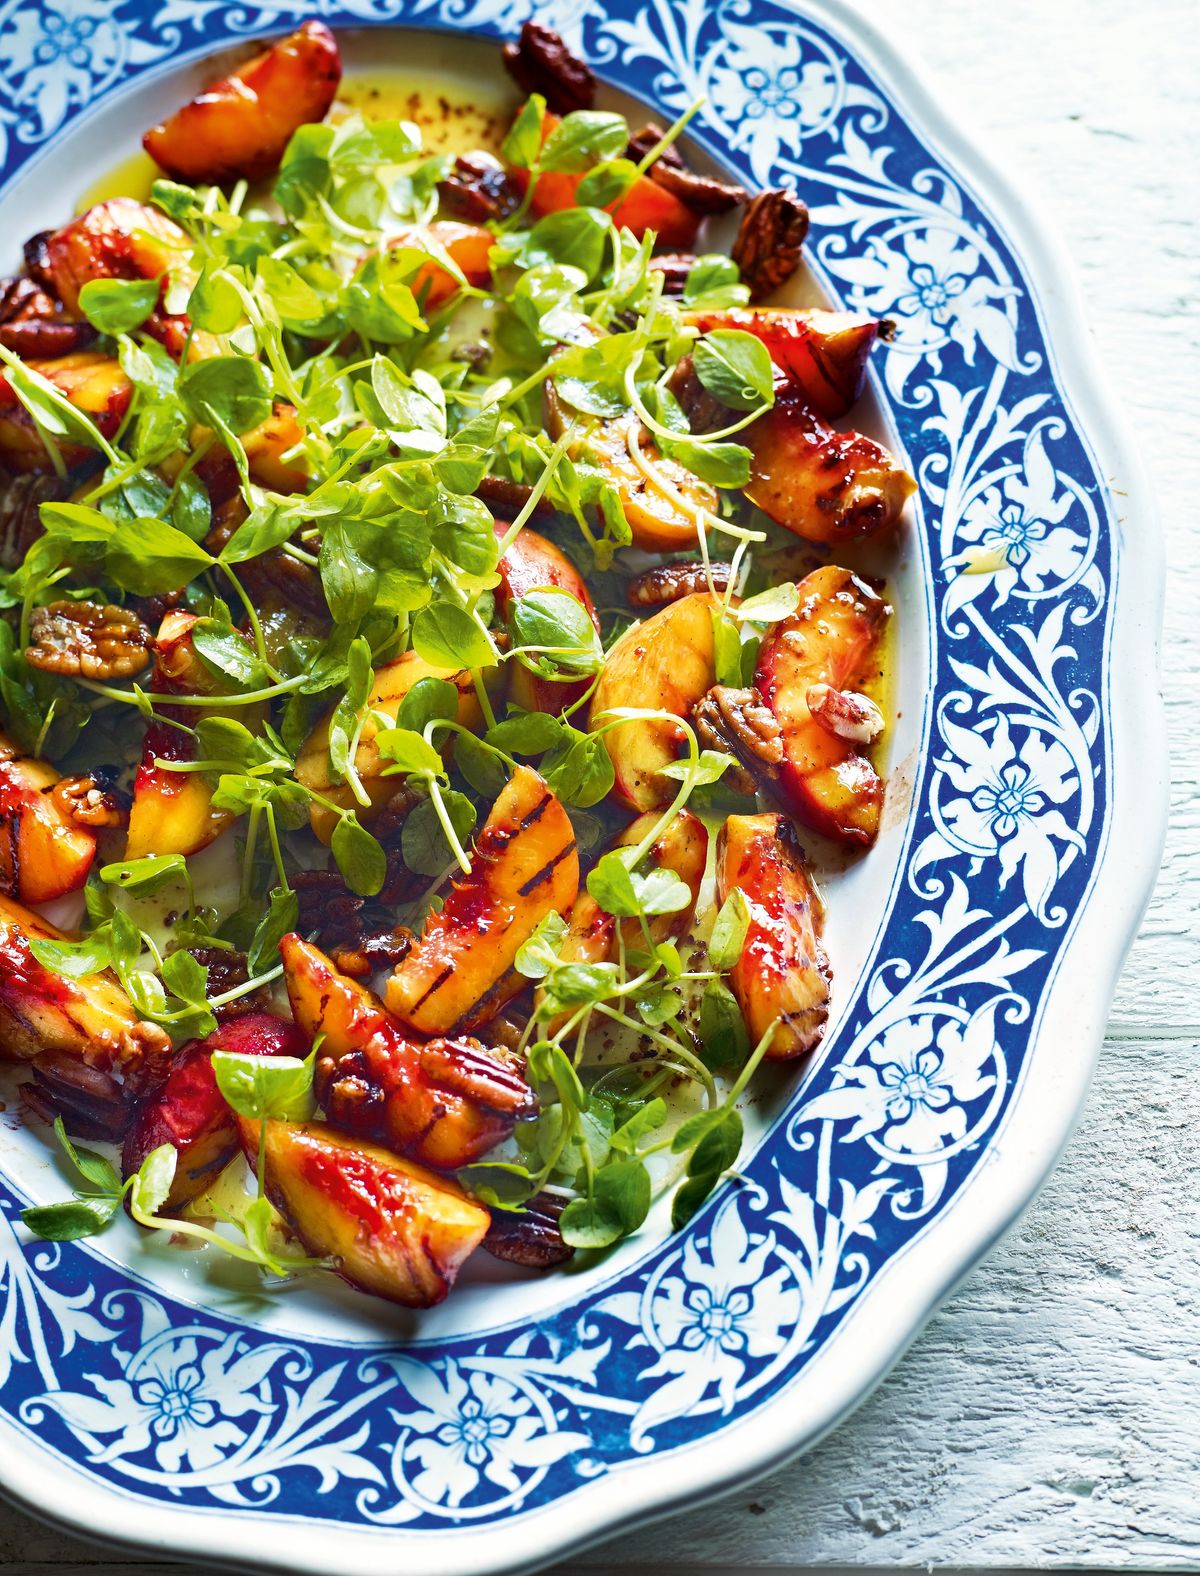 Salad of Chilli and Honey Peaches, Leaves and Pecans